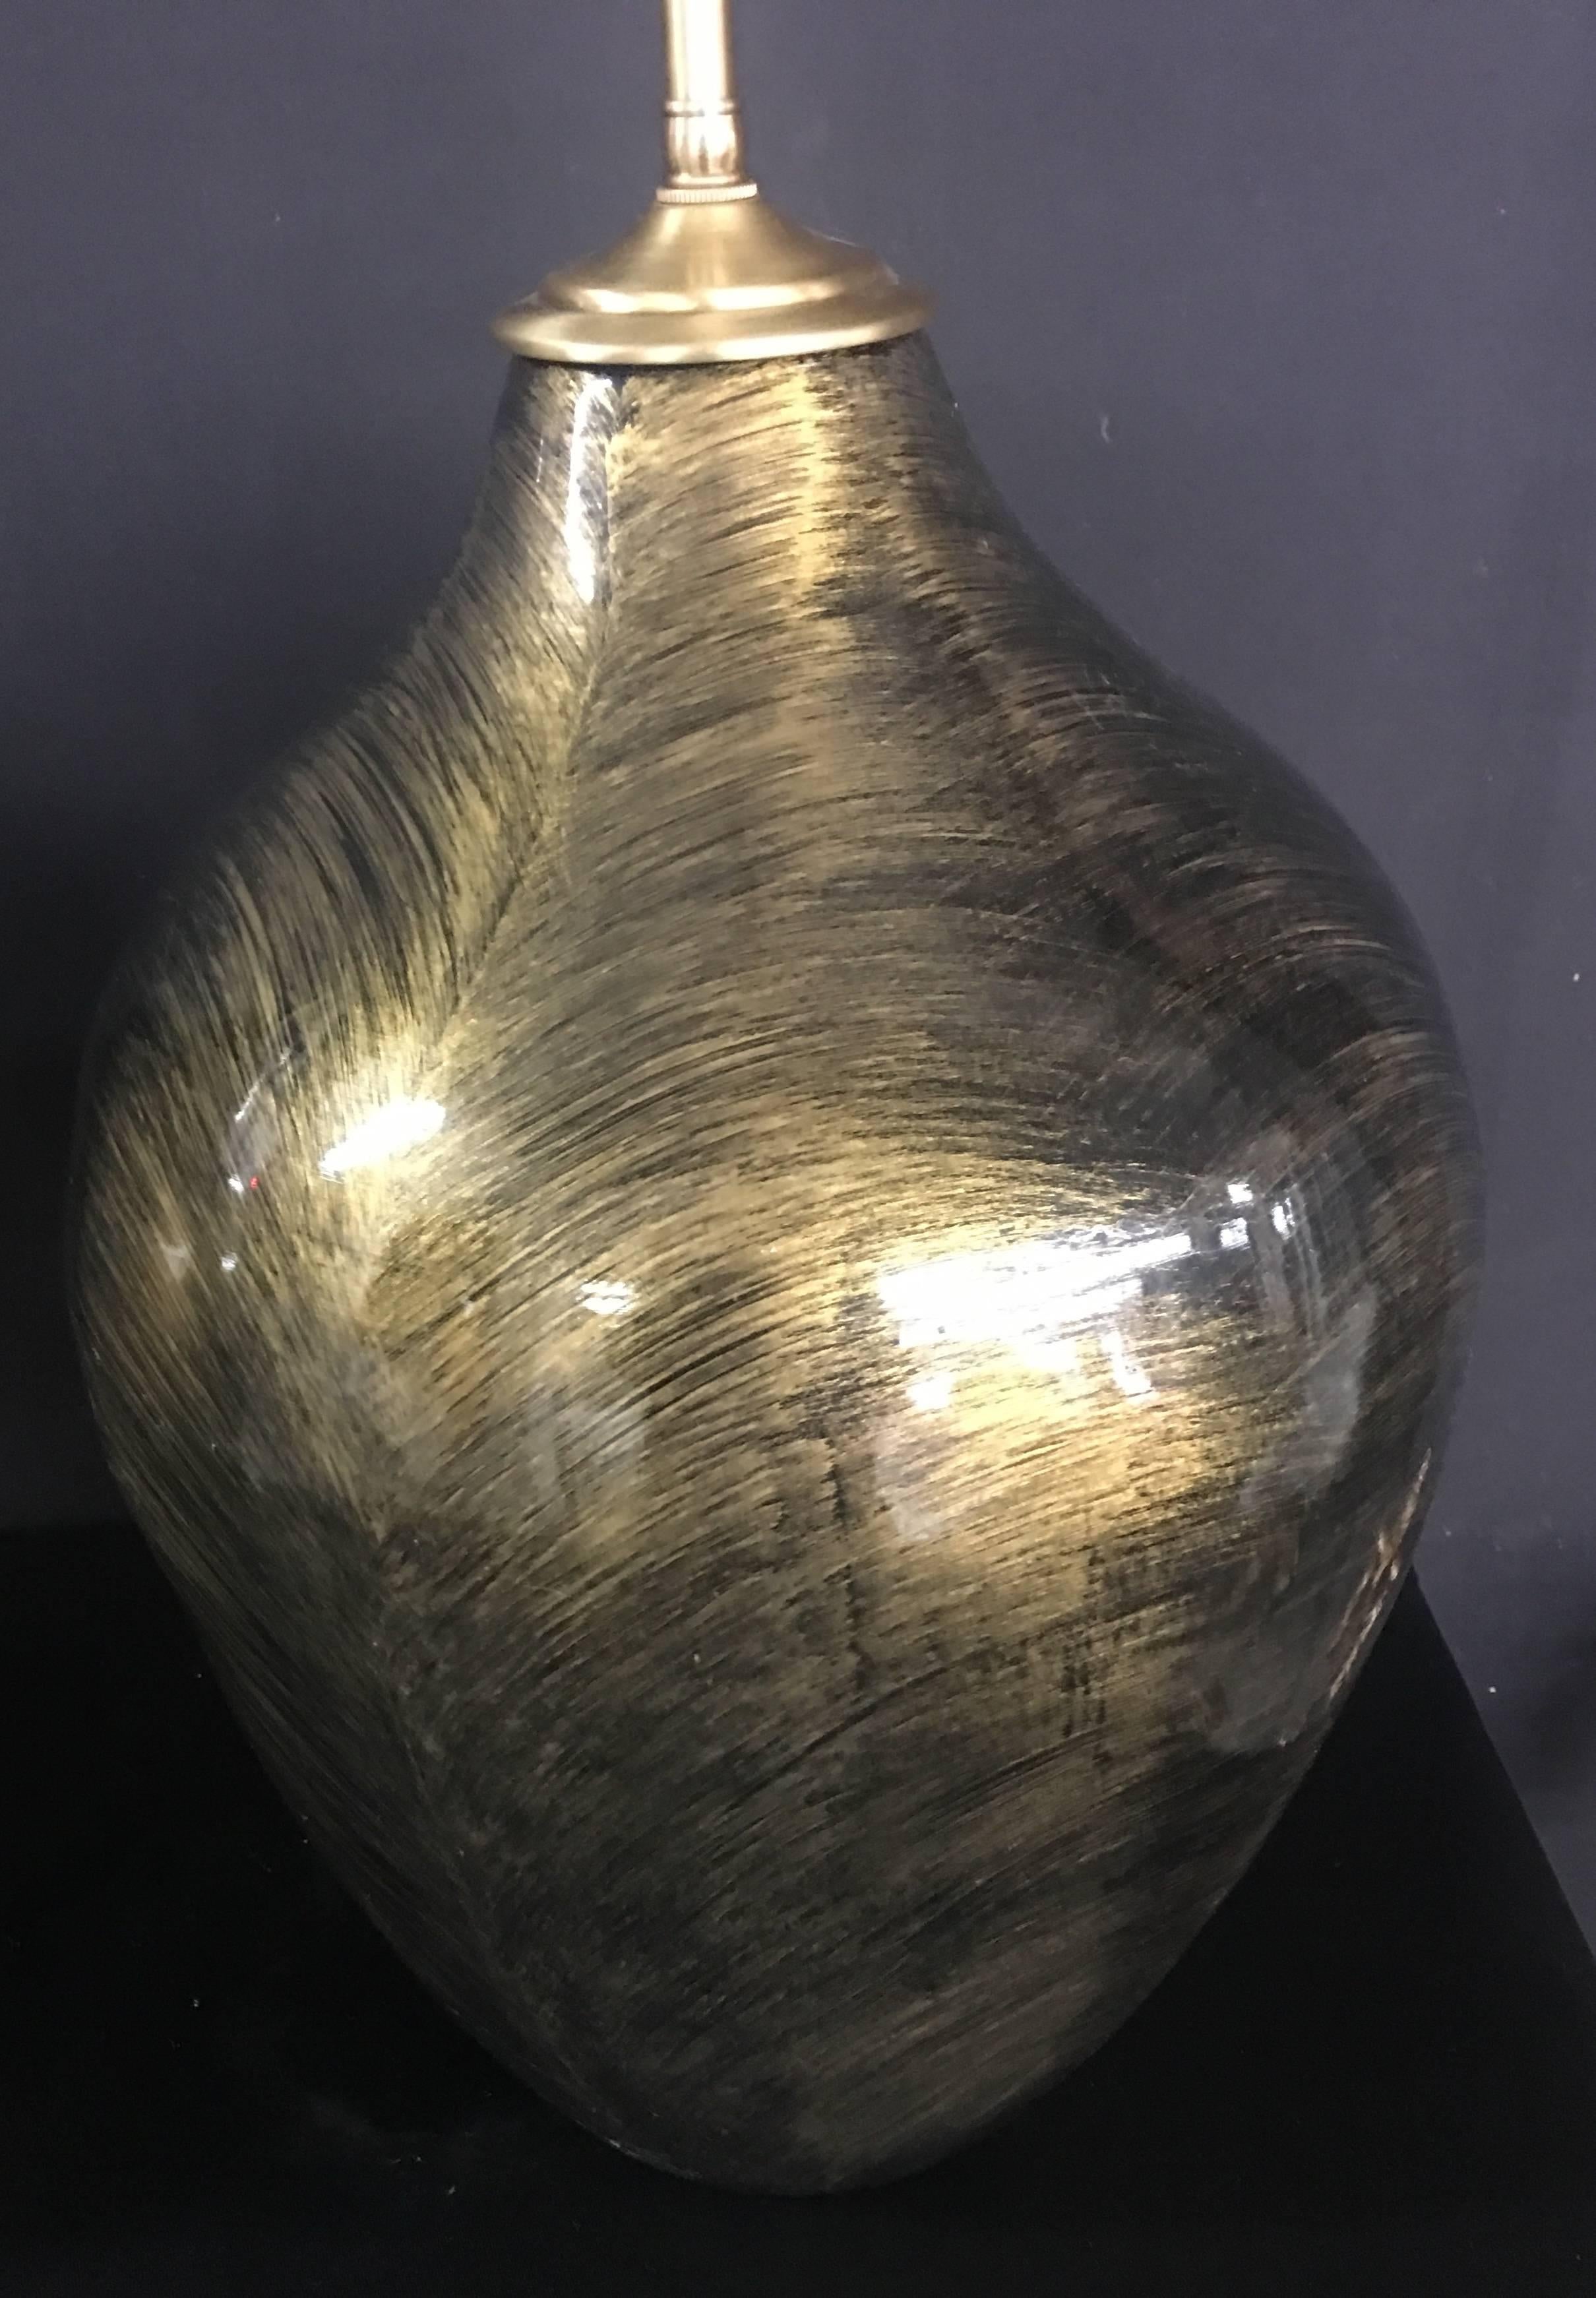 Pair of gold and black glazed orbs with lamp application, the lamps are newly wired. The hardware is brushed brass, the dual sockets are individually controlled. The vessel height is 18